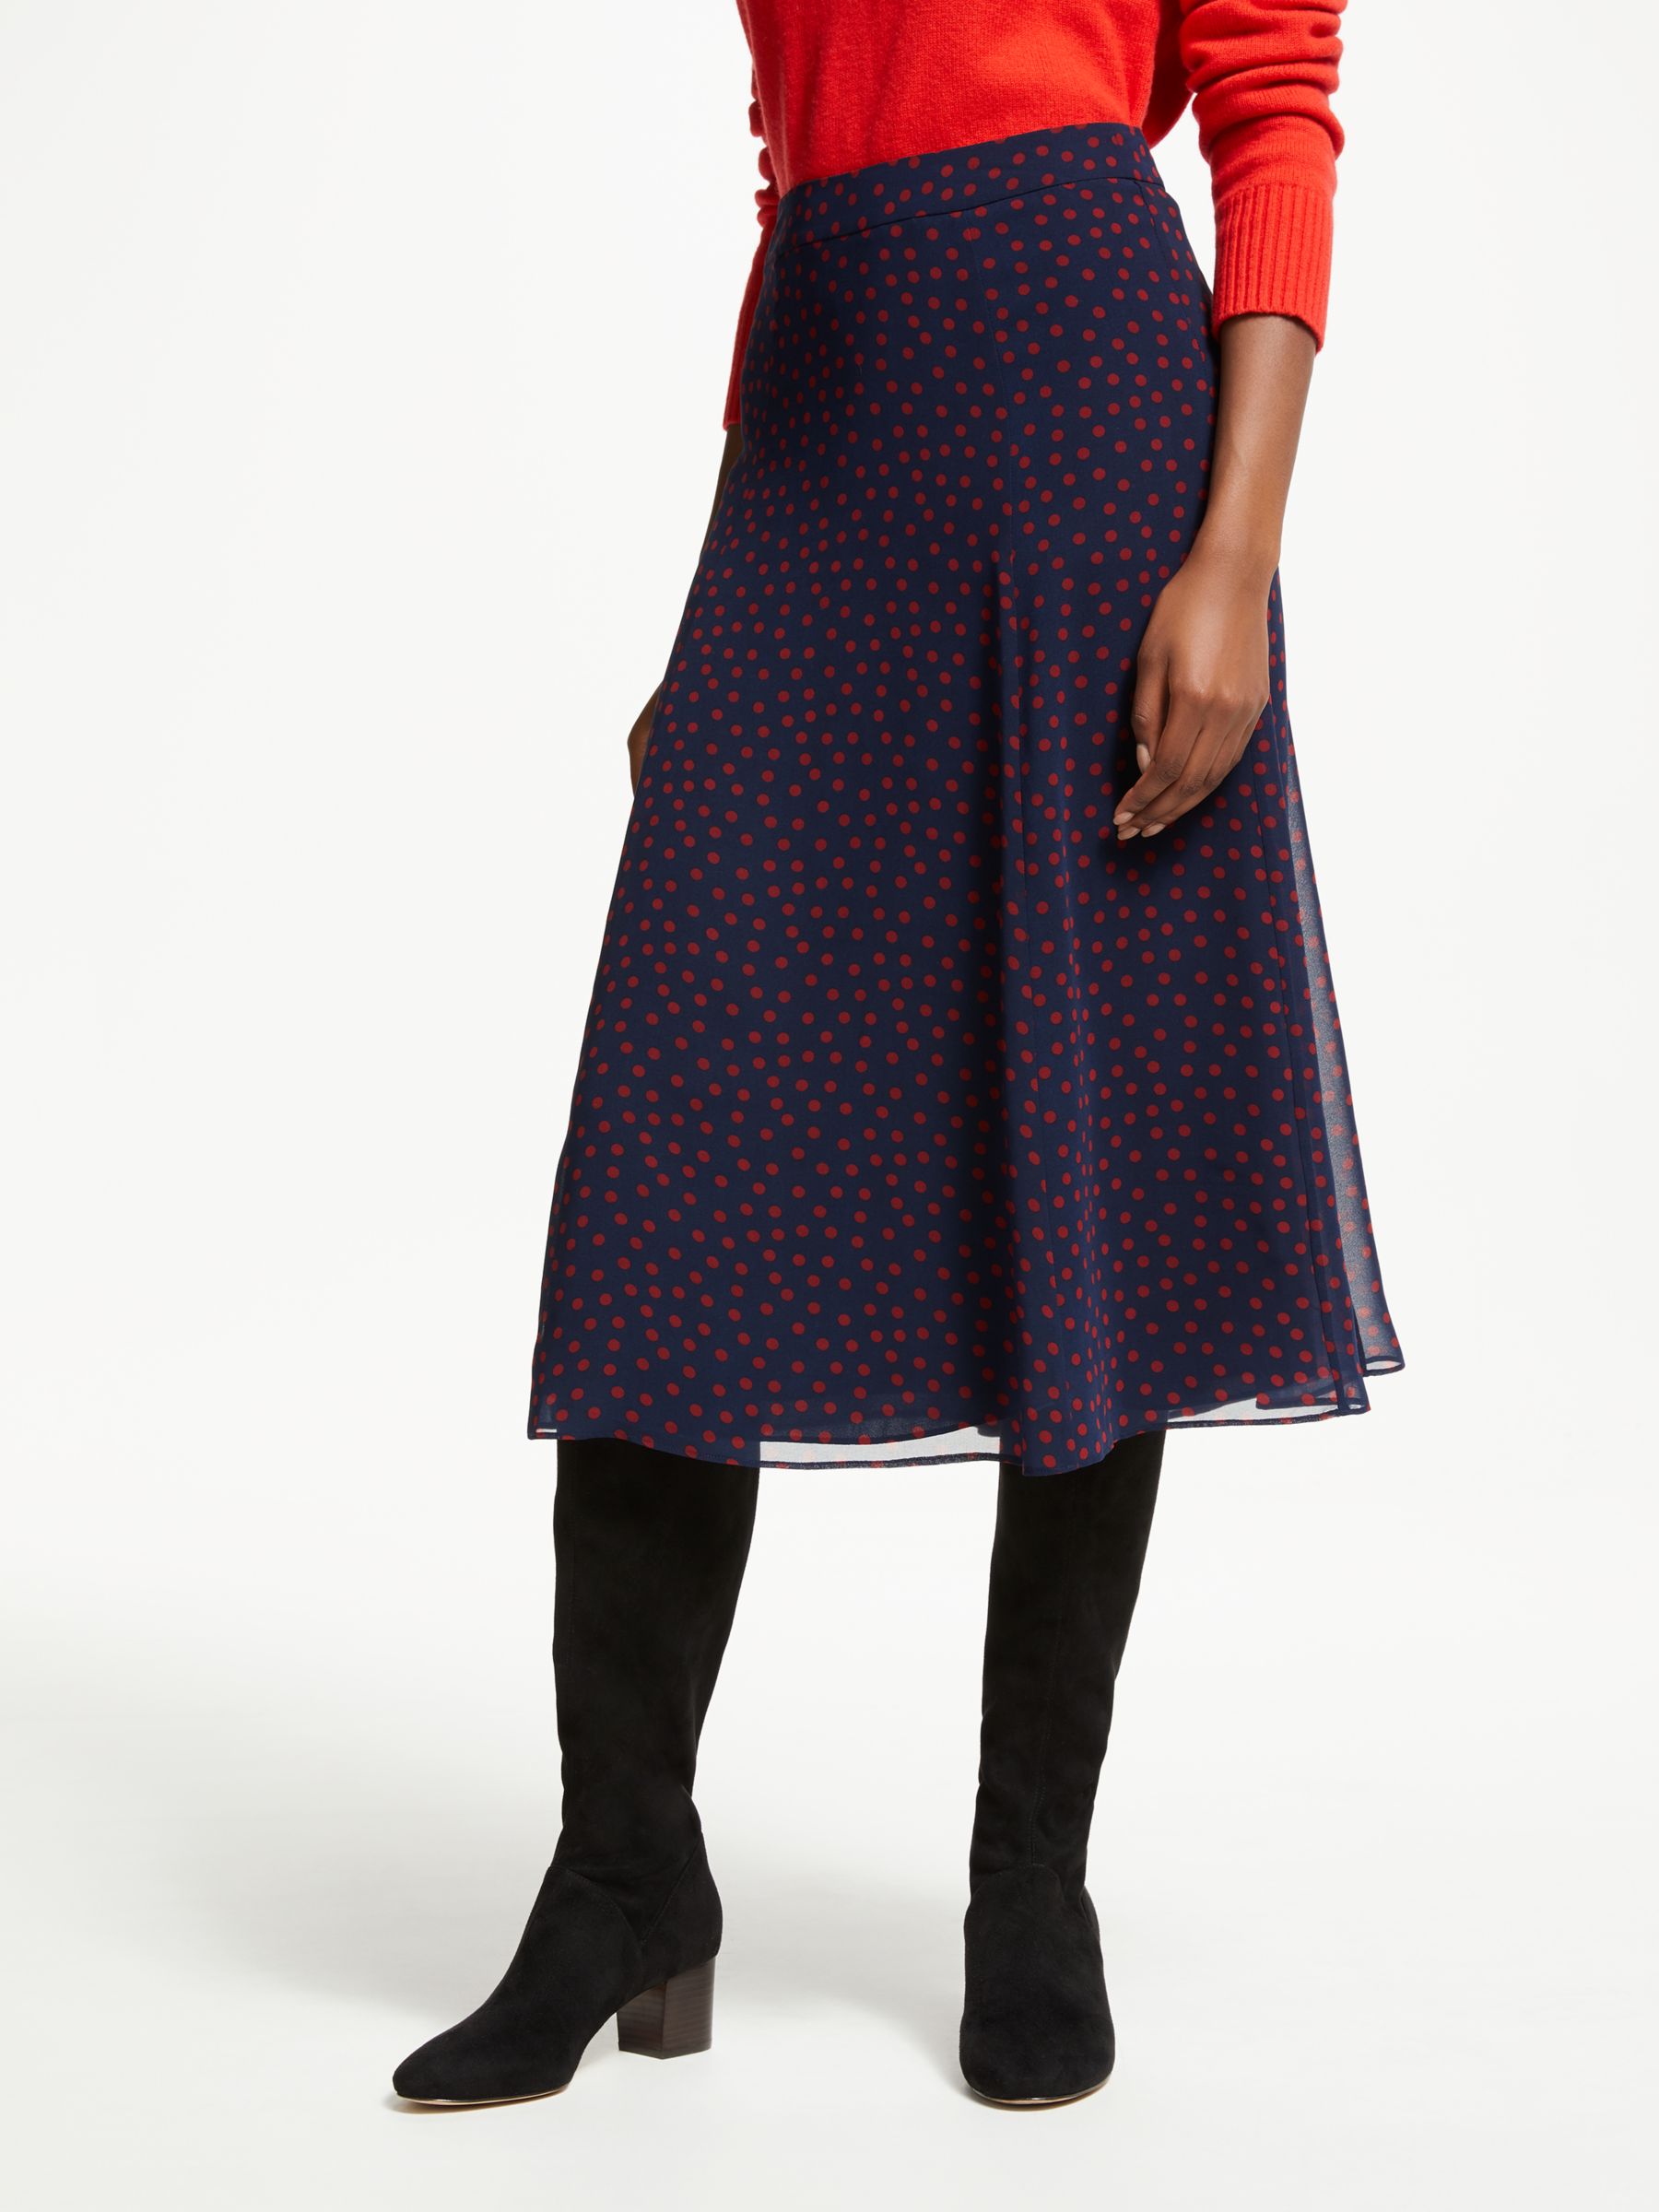 Boden Serena Midi Skirt, Navy With Red Spots